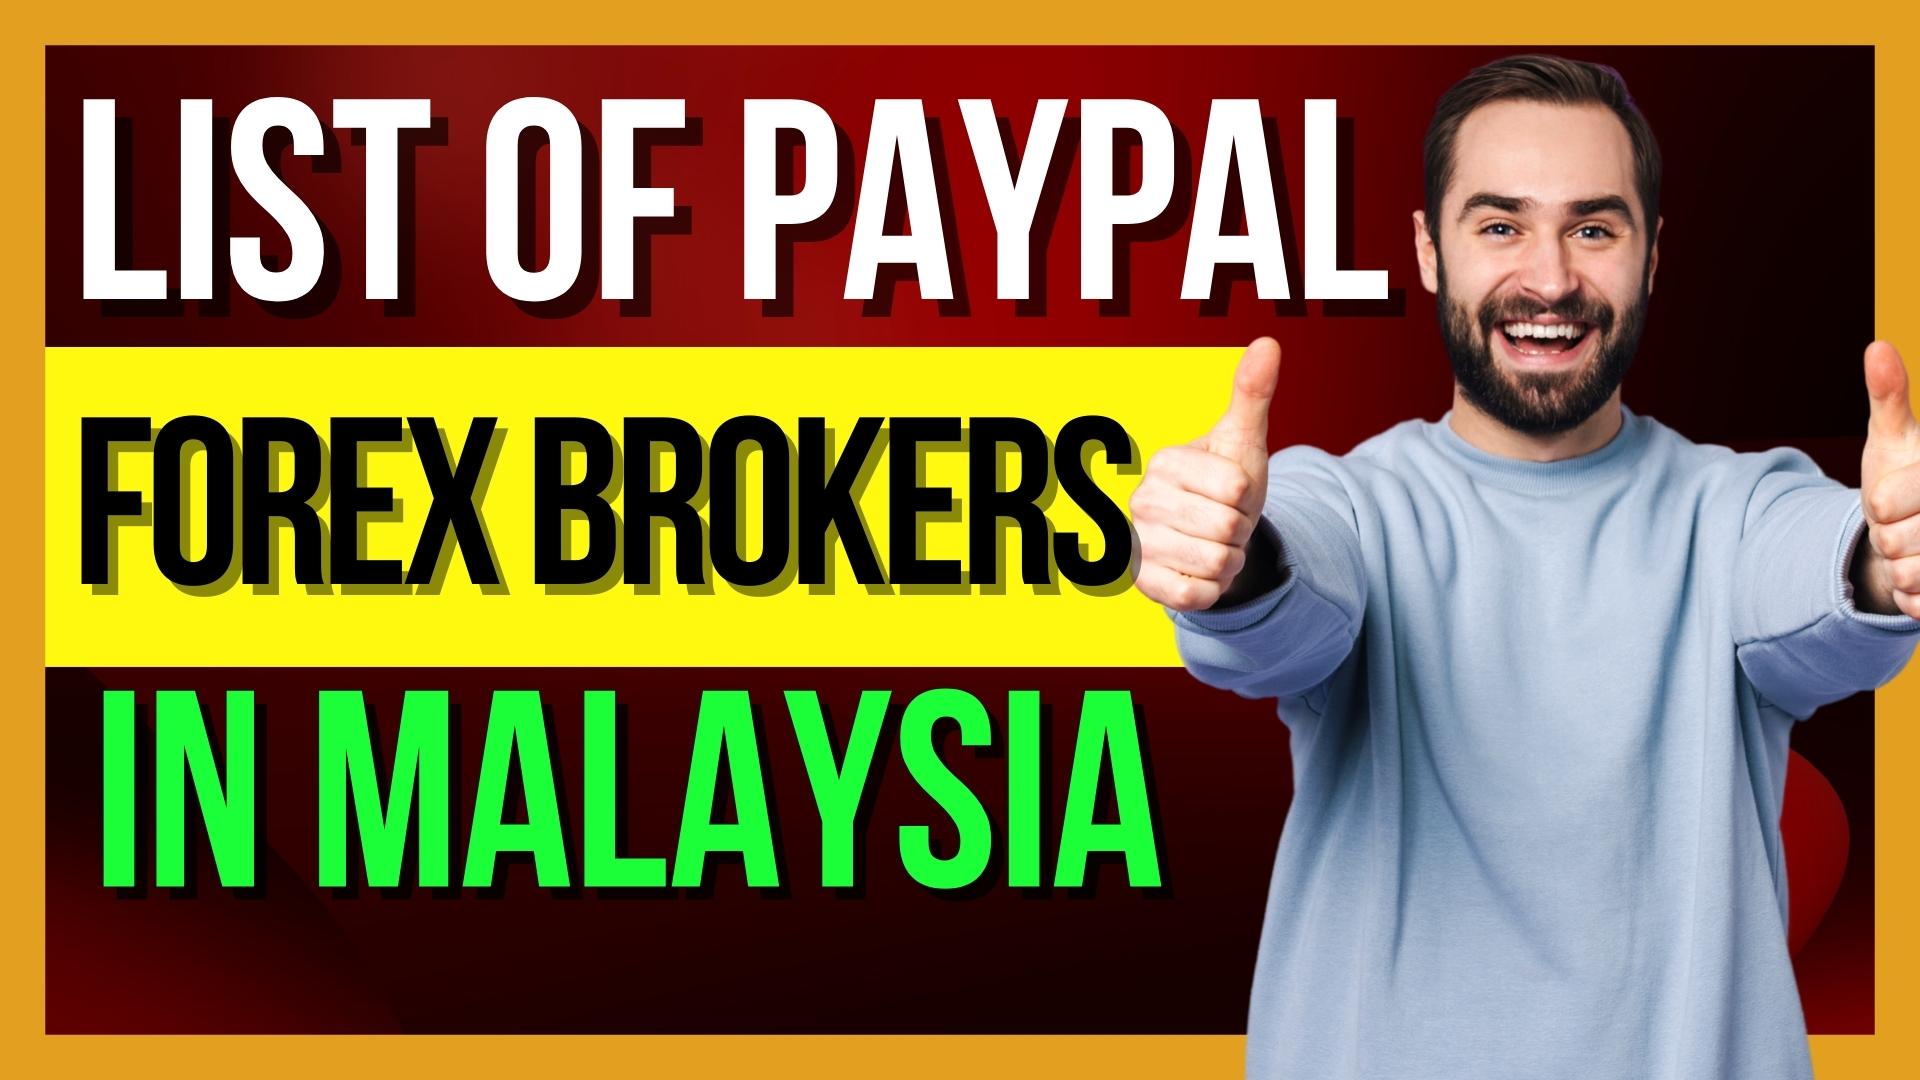 List Of PayPal Forex Brokers 2022 - Forex Brokers That Accepts PayPal 💸 Deposits